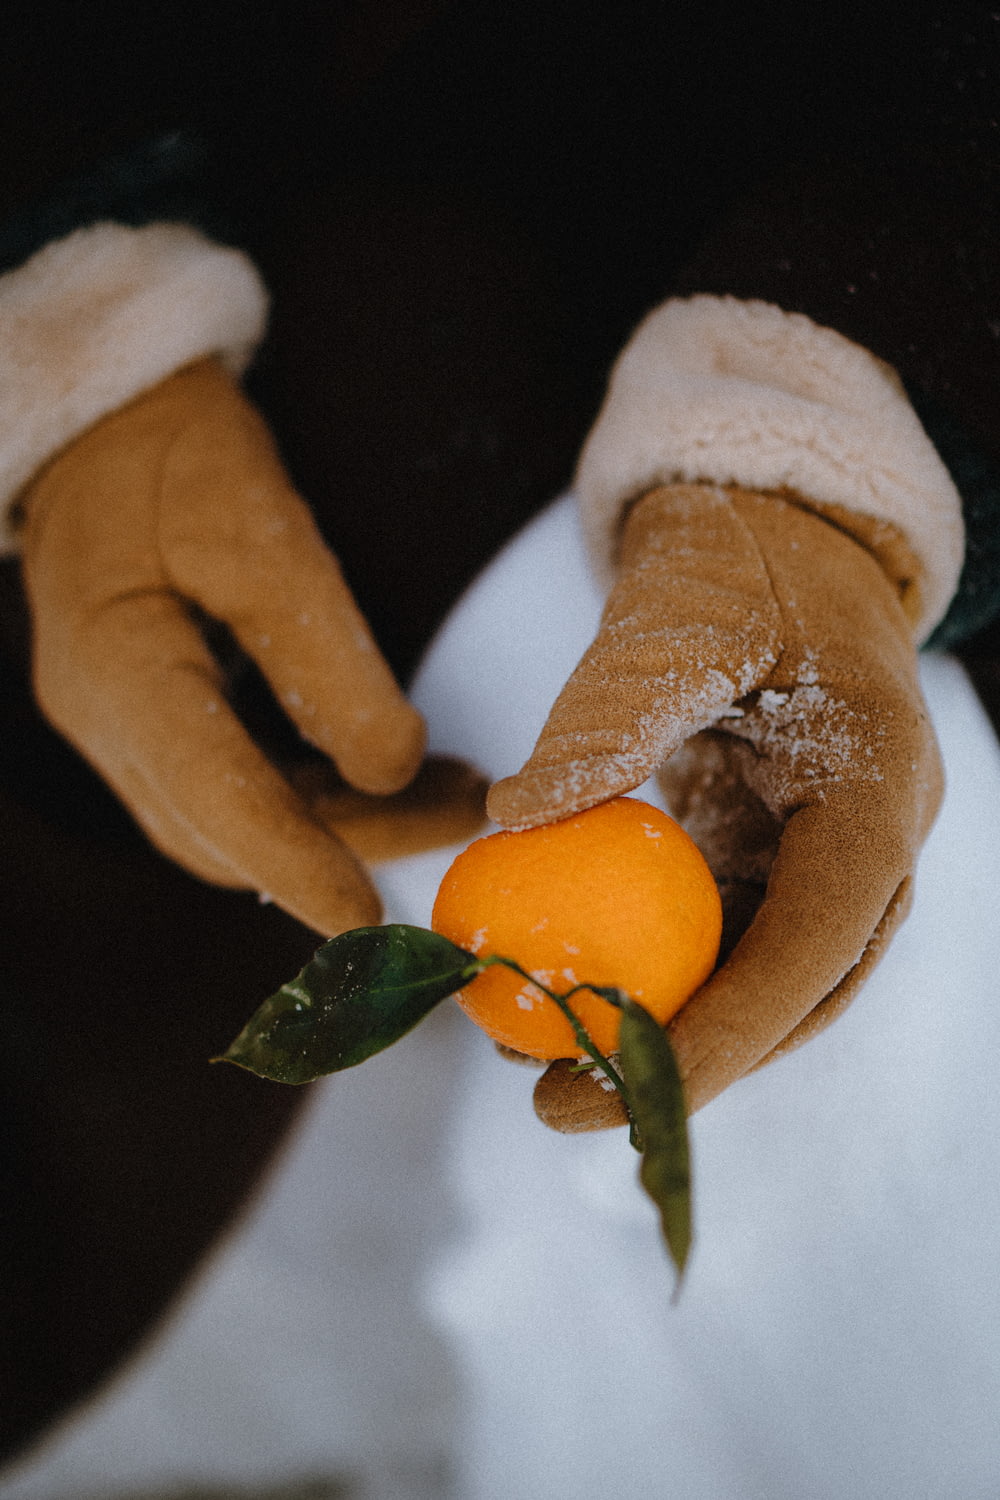 a person wearing gloves and holding an orange